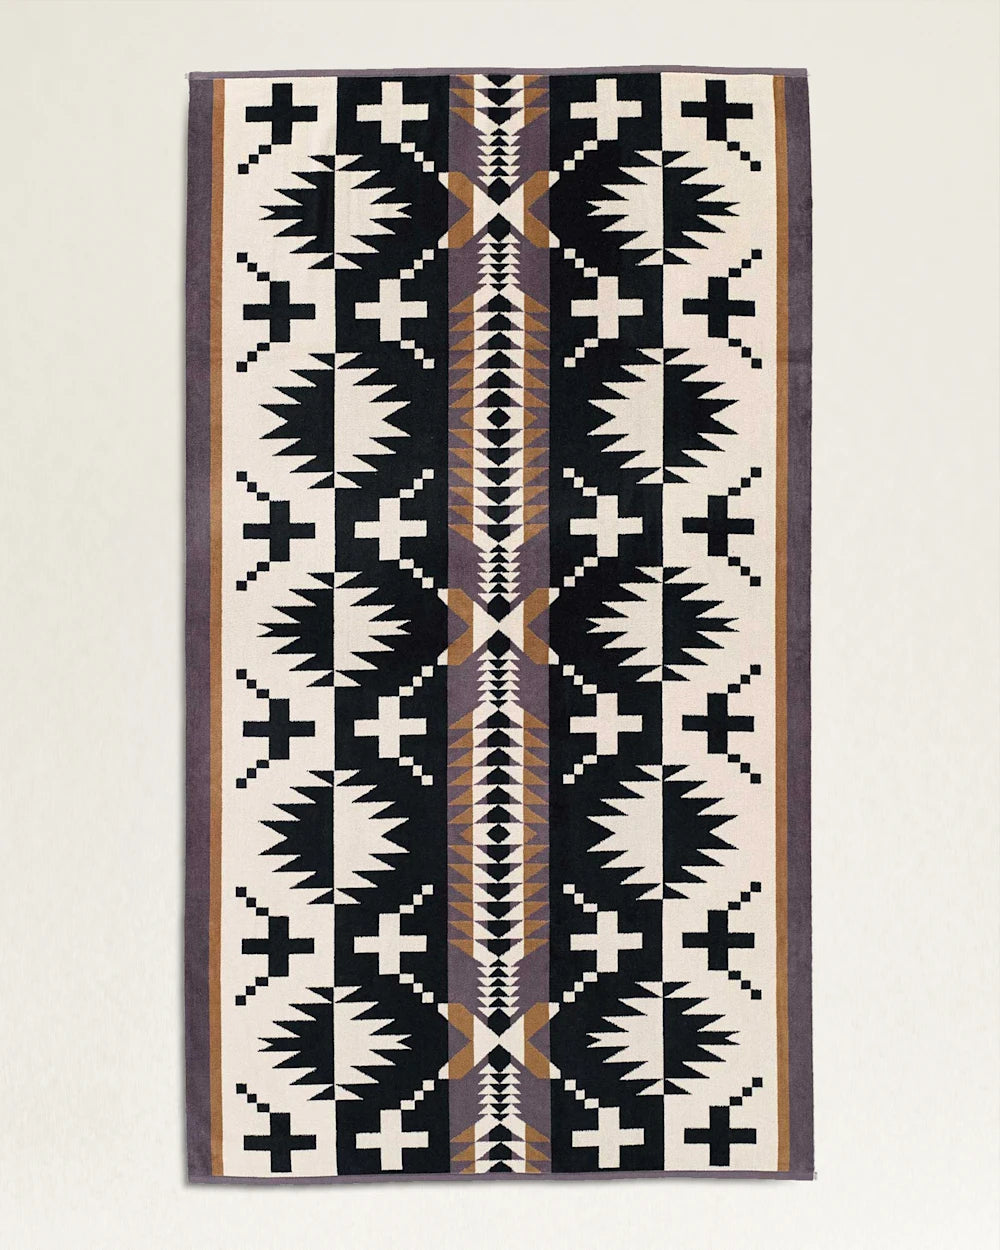 A traditional geometric patterned rug with a symmetrical design featuring black, white, and earth tones, displayed against a bungalow's light textured wall in Scottsdale, Arizona. - 
A Pendleton/Babblitt's Wholesale Spa Towel with a symmetrical design featuring black, white, and earth tones, displayed against a bungalow's light textured wall in Scottsdale, Arizona.